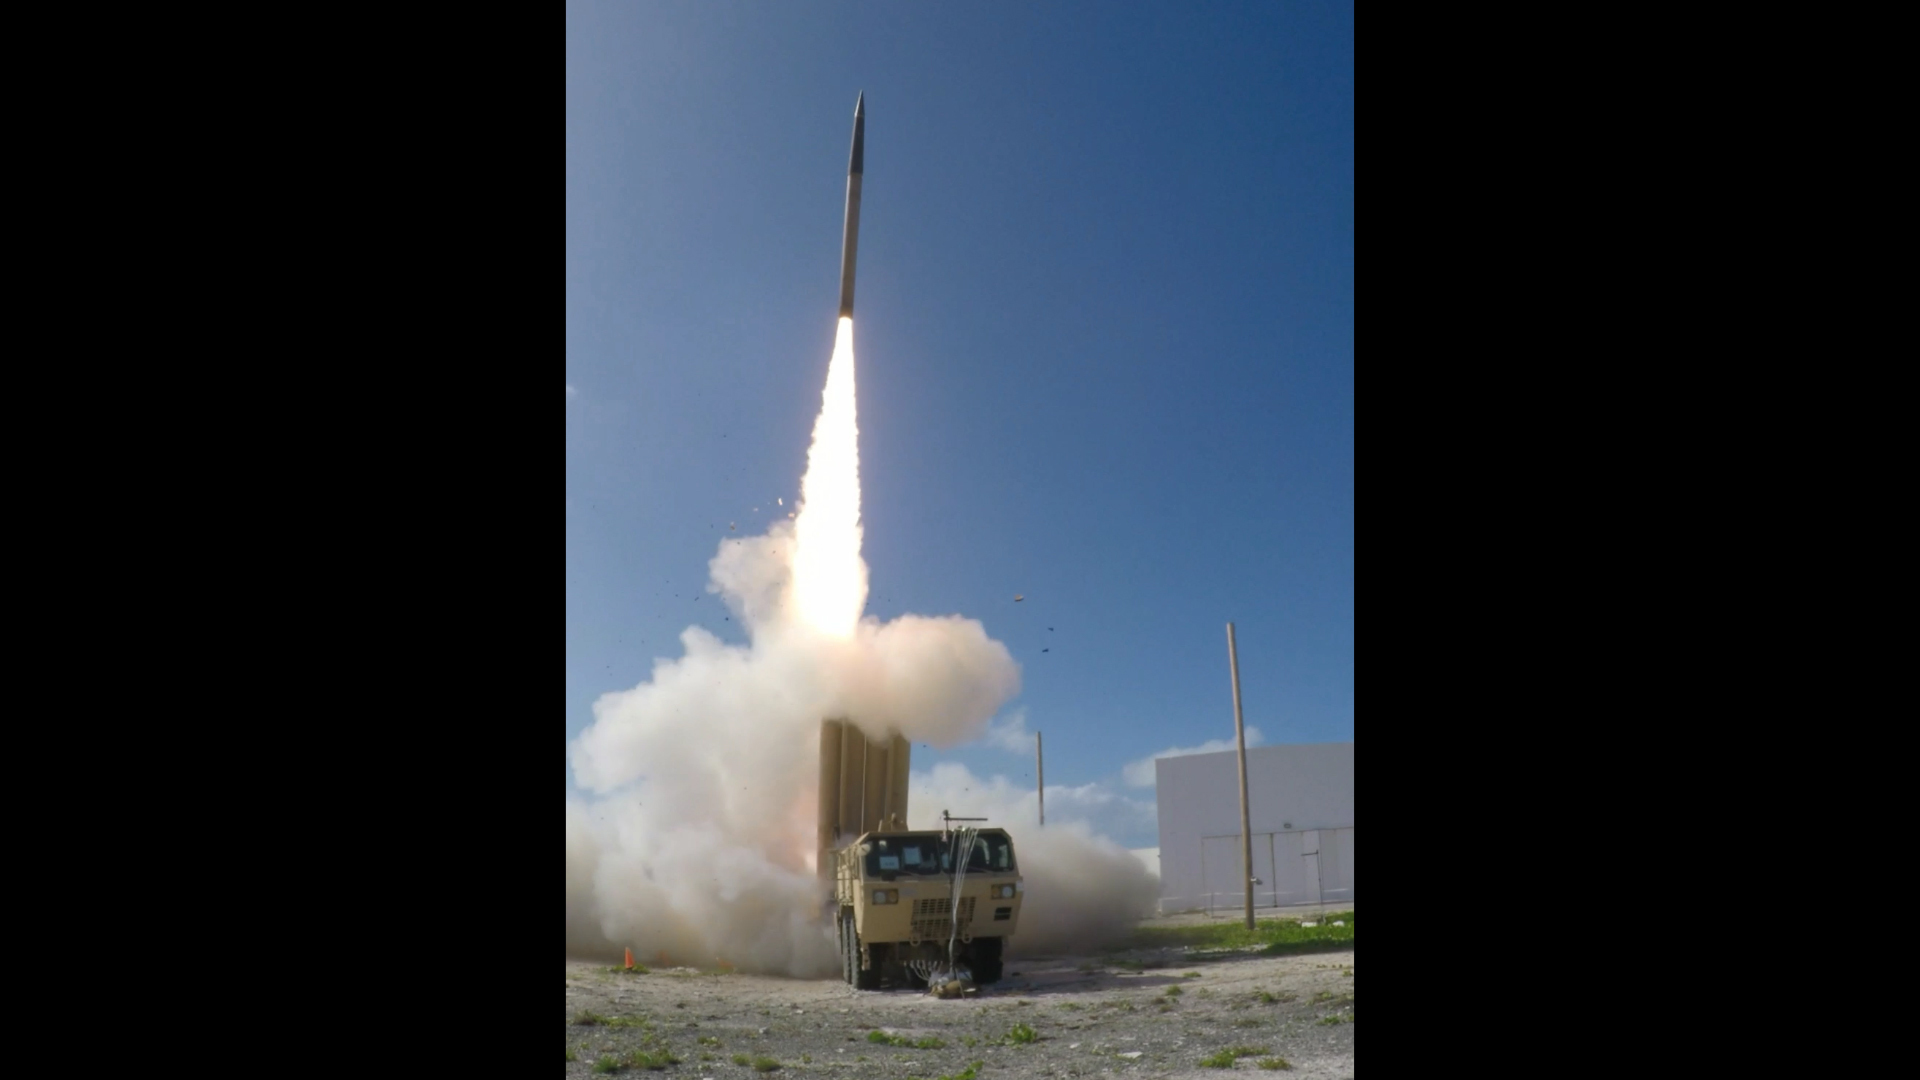 This US Department of Defense/Missile Defense Agency handout photo shows a terminal High Altitude Area Defense (THAAD) interceptor launching from a THAAD battery located on Wake Island, during Flight Test Operational (FTO)-02 Event 2a, conducted on November 1, 2015.   During the test, the THAAD system successfully intercepted two air-launched ballistic missile targets. / AFP PHOTO / DoD / Ben Listerman / RESTRICTED TO EDITORIAL USE - MANDATORY CREDIT "AFP PHOTO / DoD / Missile Defense Agency / Ben Listerman" - NO MARKETING NO ADVERTISING CAMPAIGNS - DISTRIBUTED AS A SERVICE TO CLIENTS